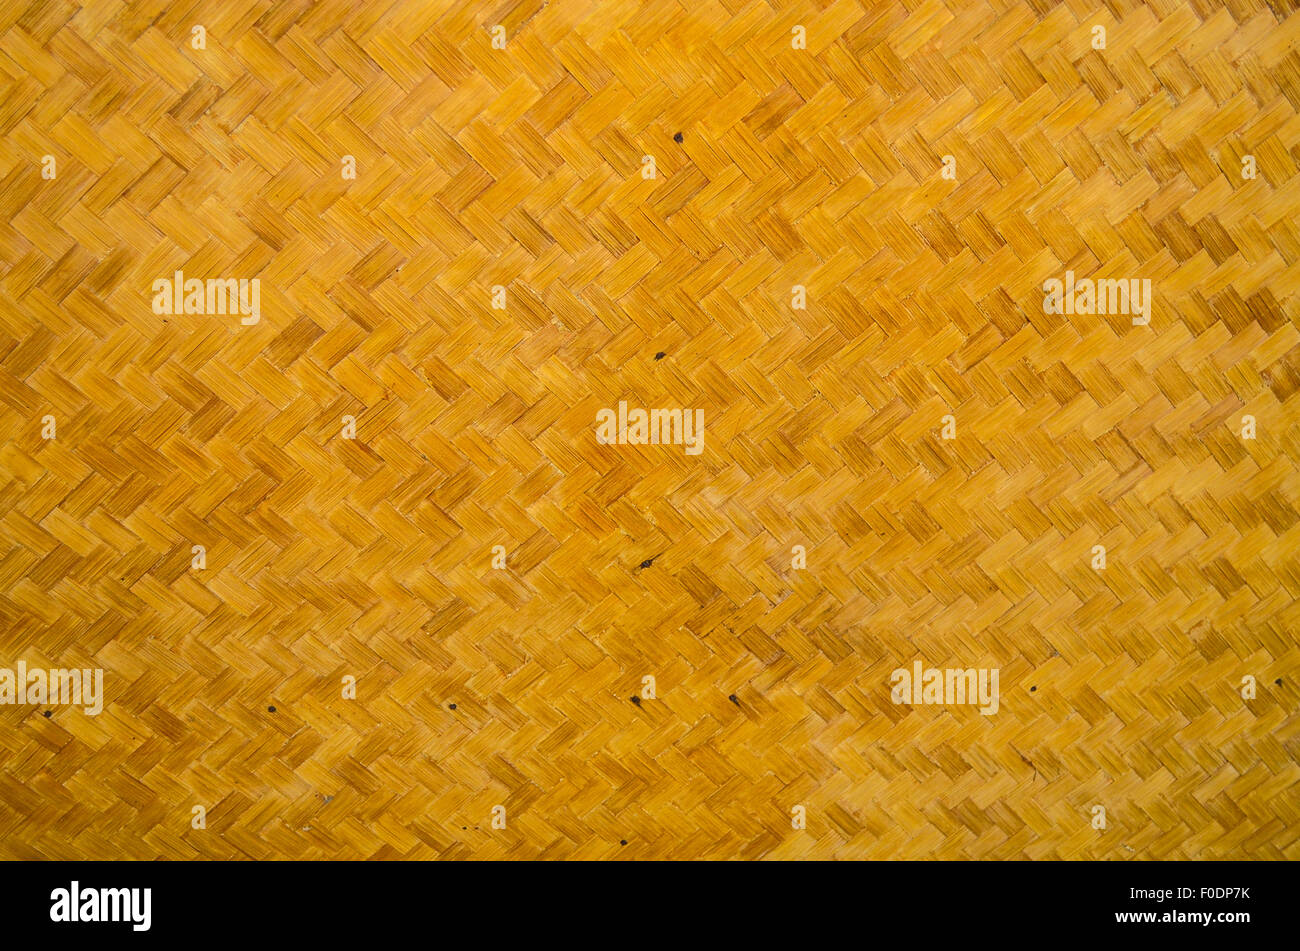 Bamboo craft texture background Banque D'Images